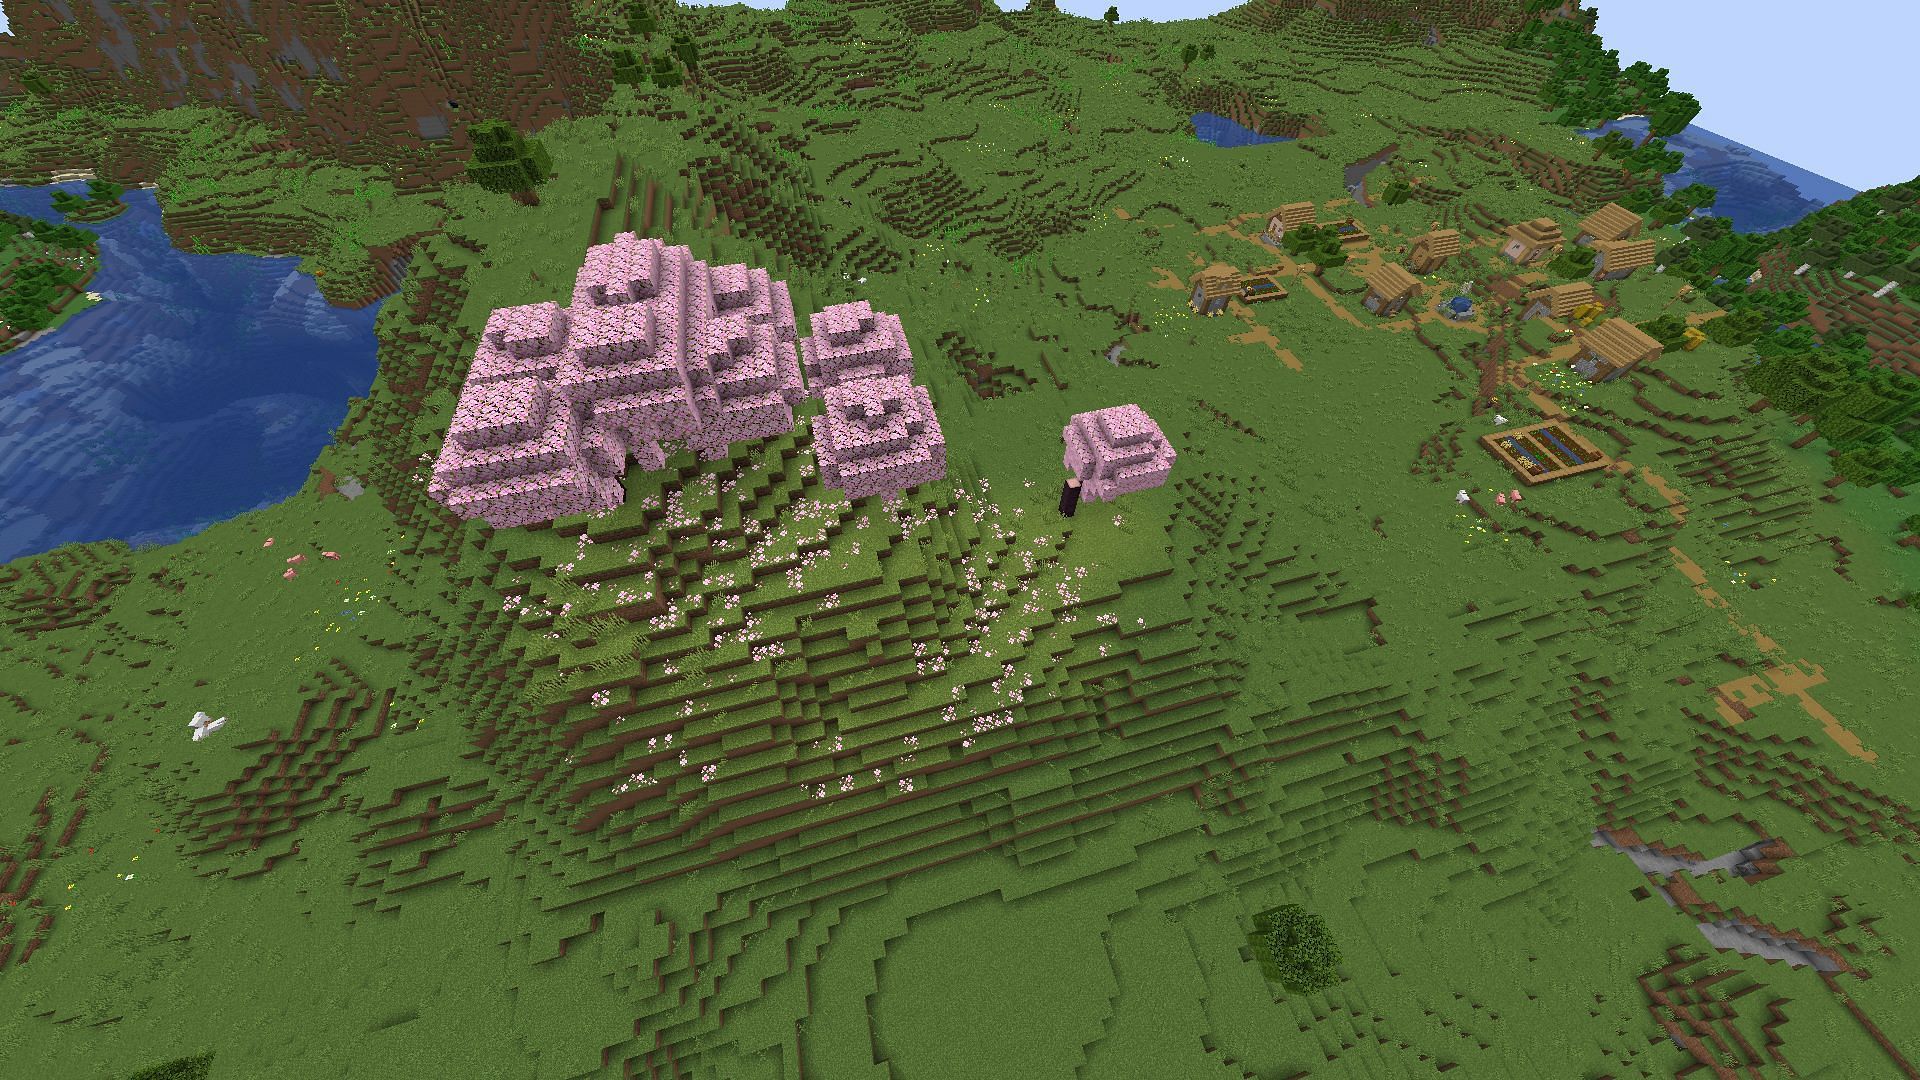 Tiniest Cherry Grove biome, consisting of only a few trees in Minecraft 1.20.1 (Image via Mojang)